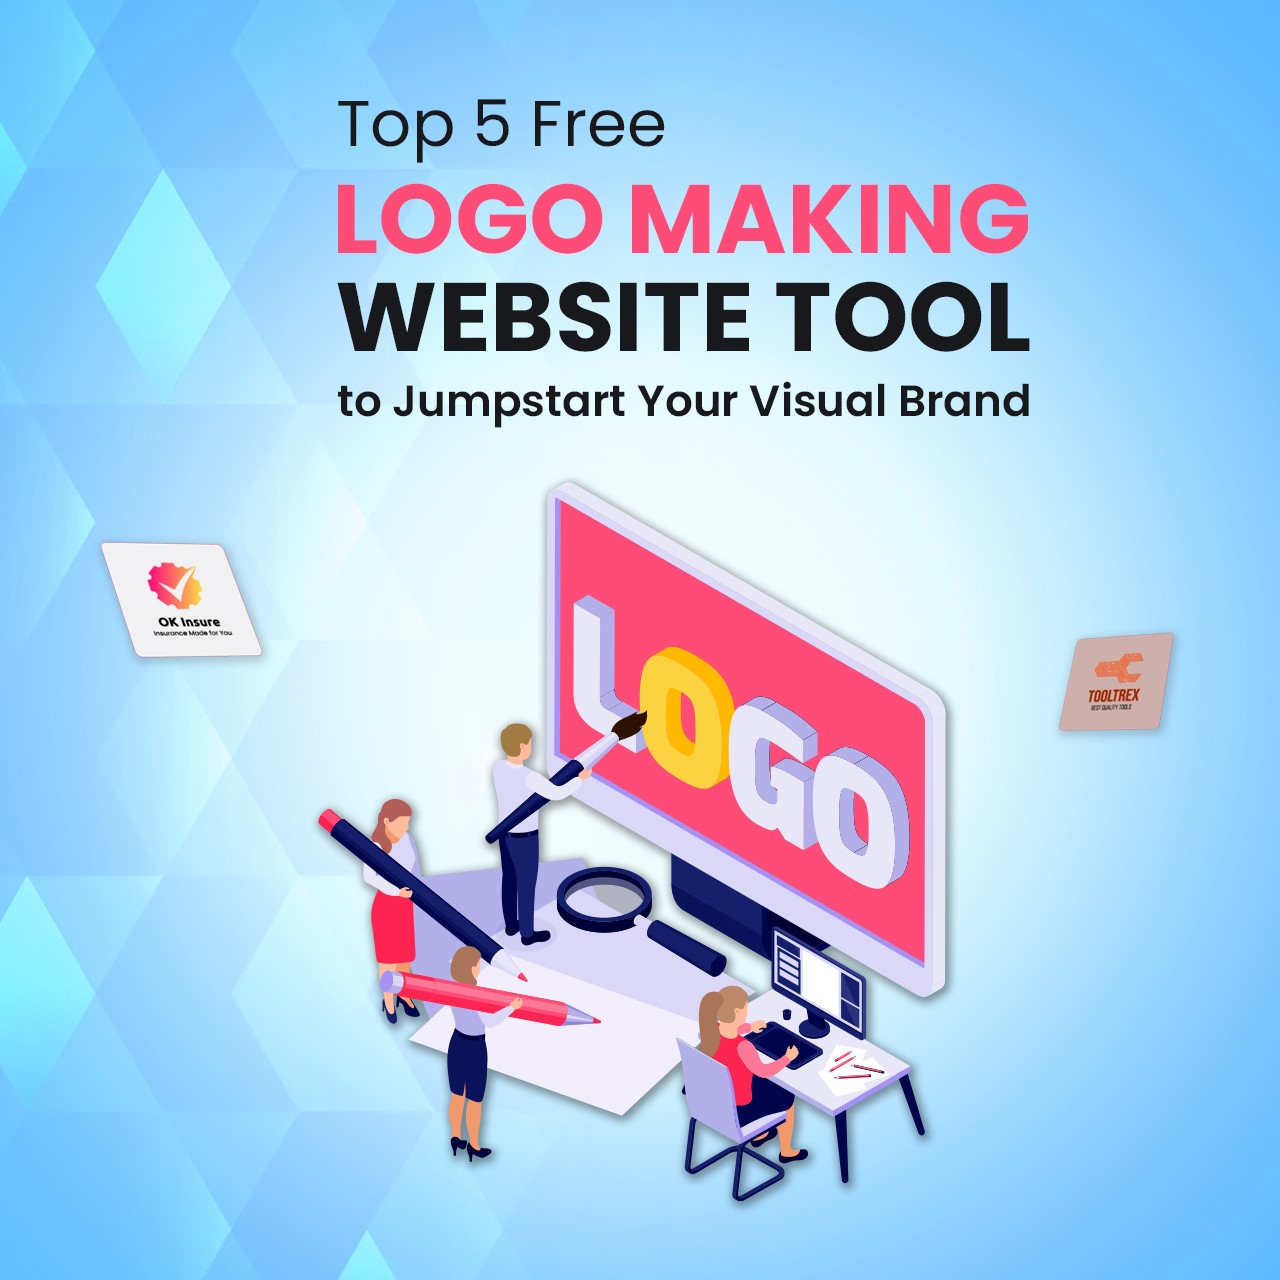 Top 5 Free Logo Making Website Tool To Jumpstart Your Visual Brand